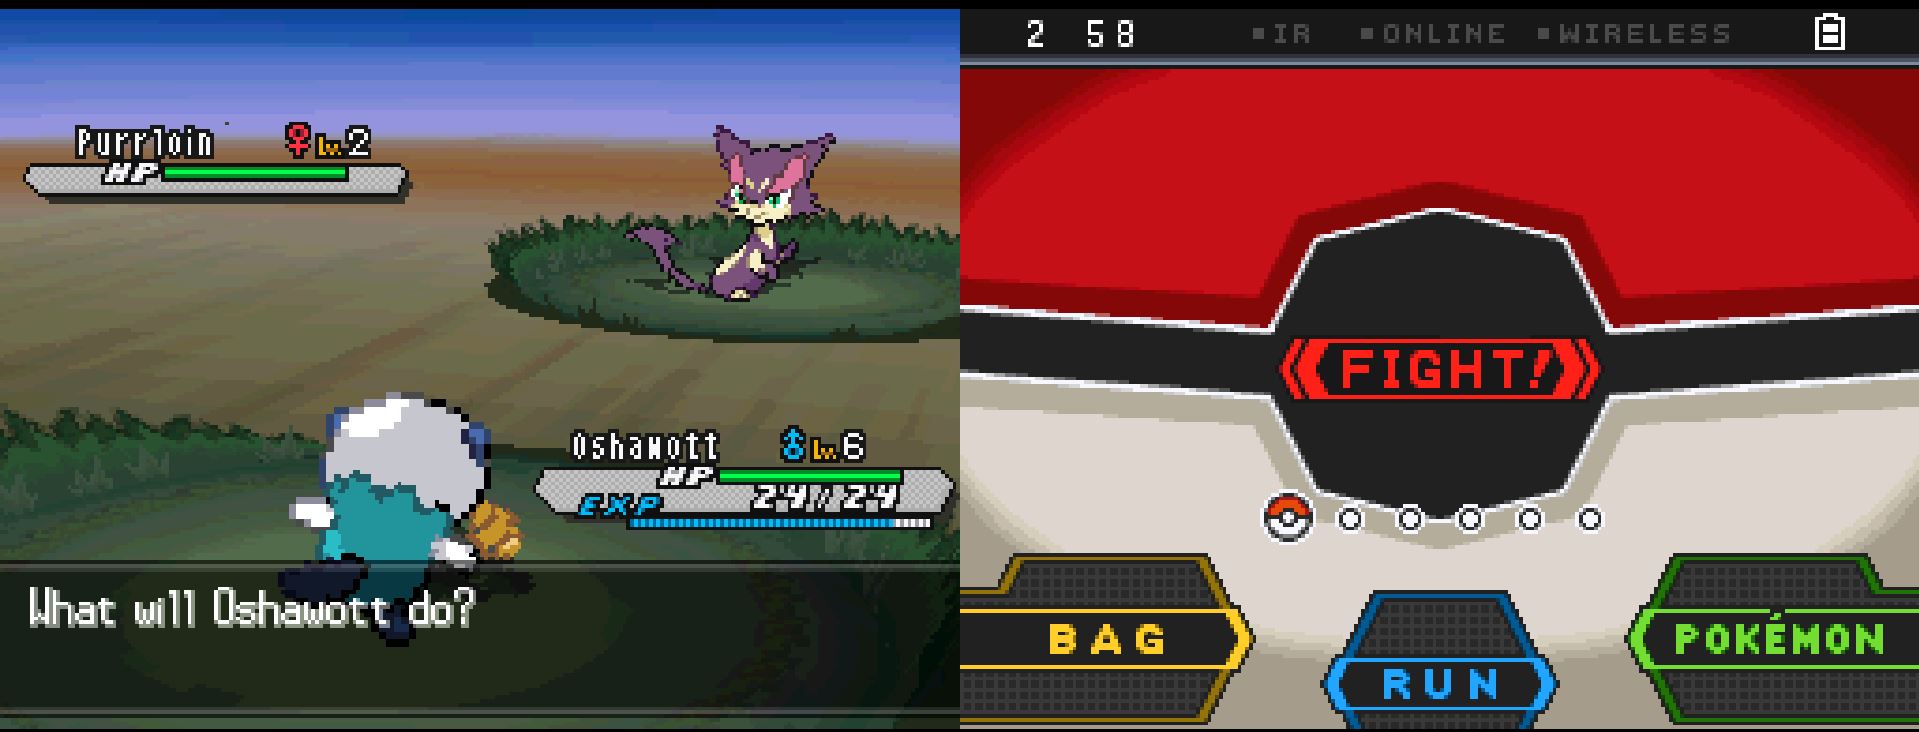 download pokemon emerald hack rom nds